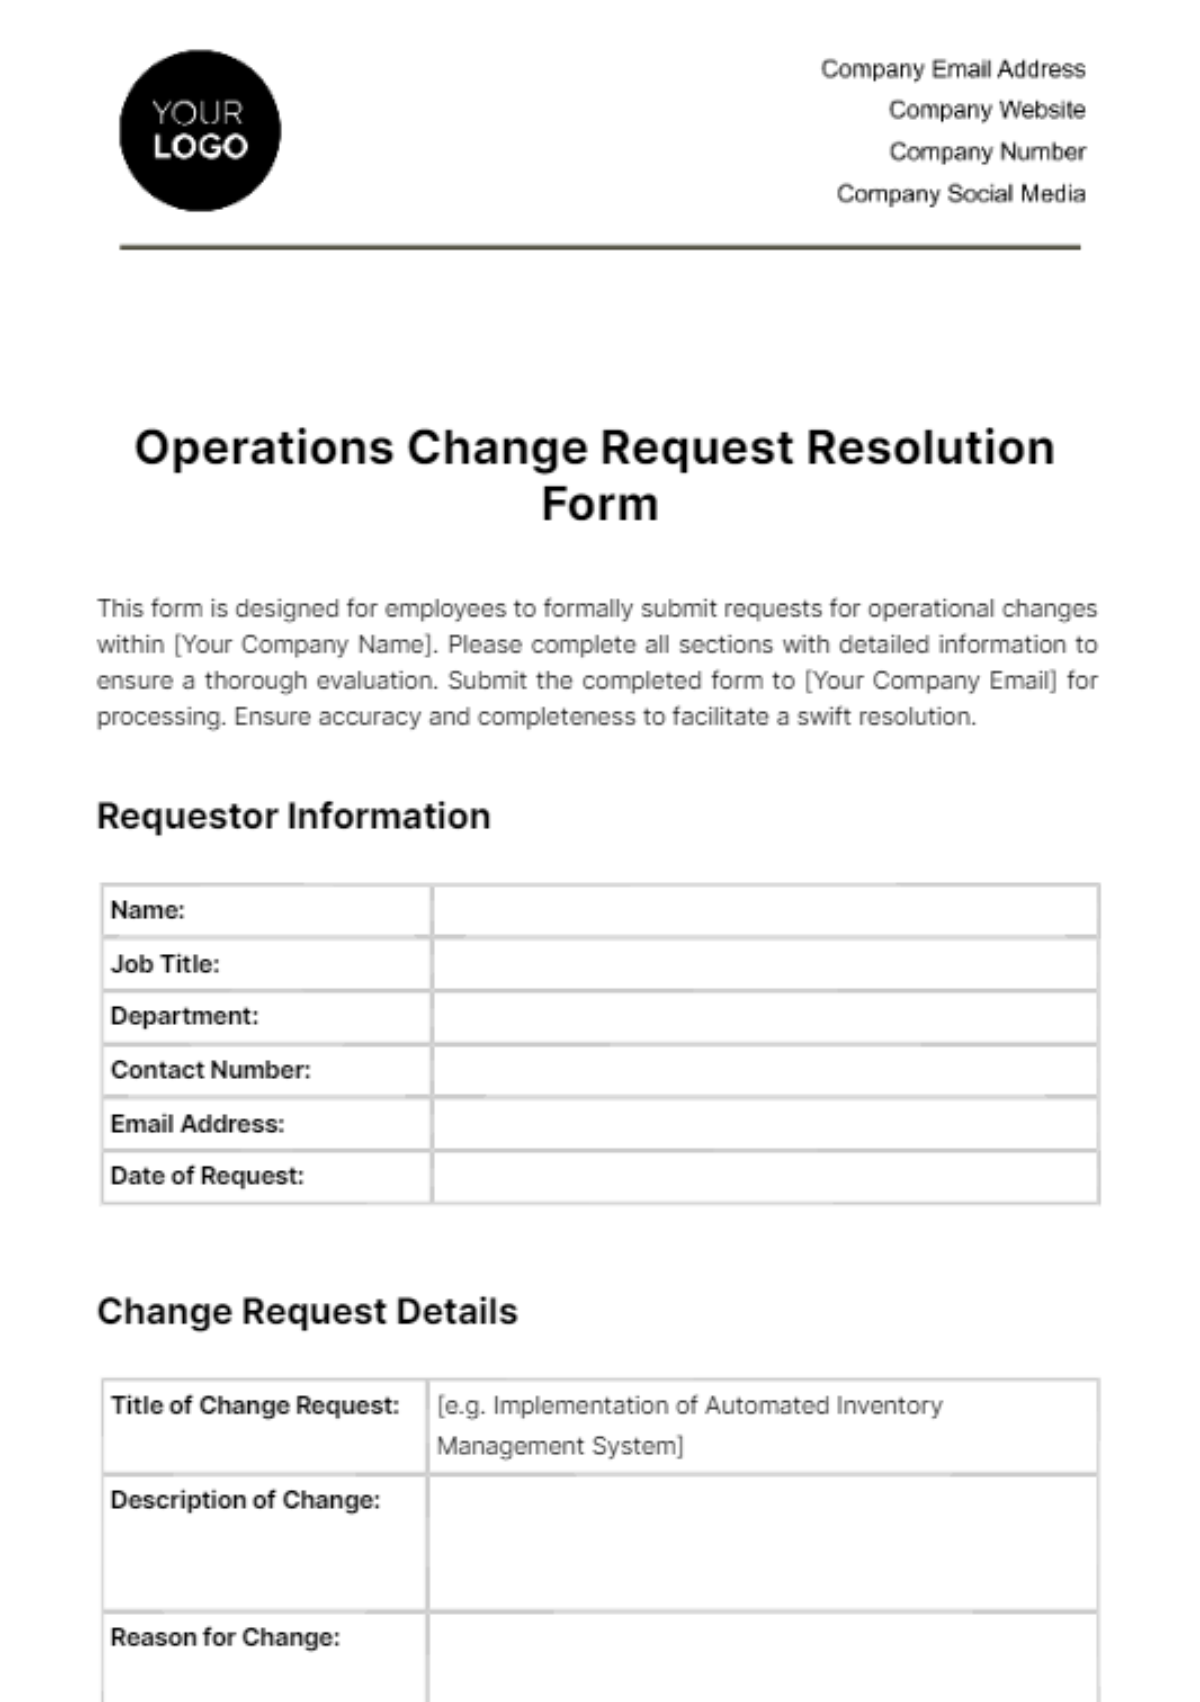 Operations Change Request Resolution Form Template